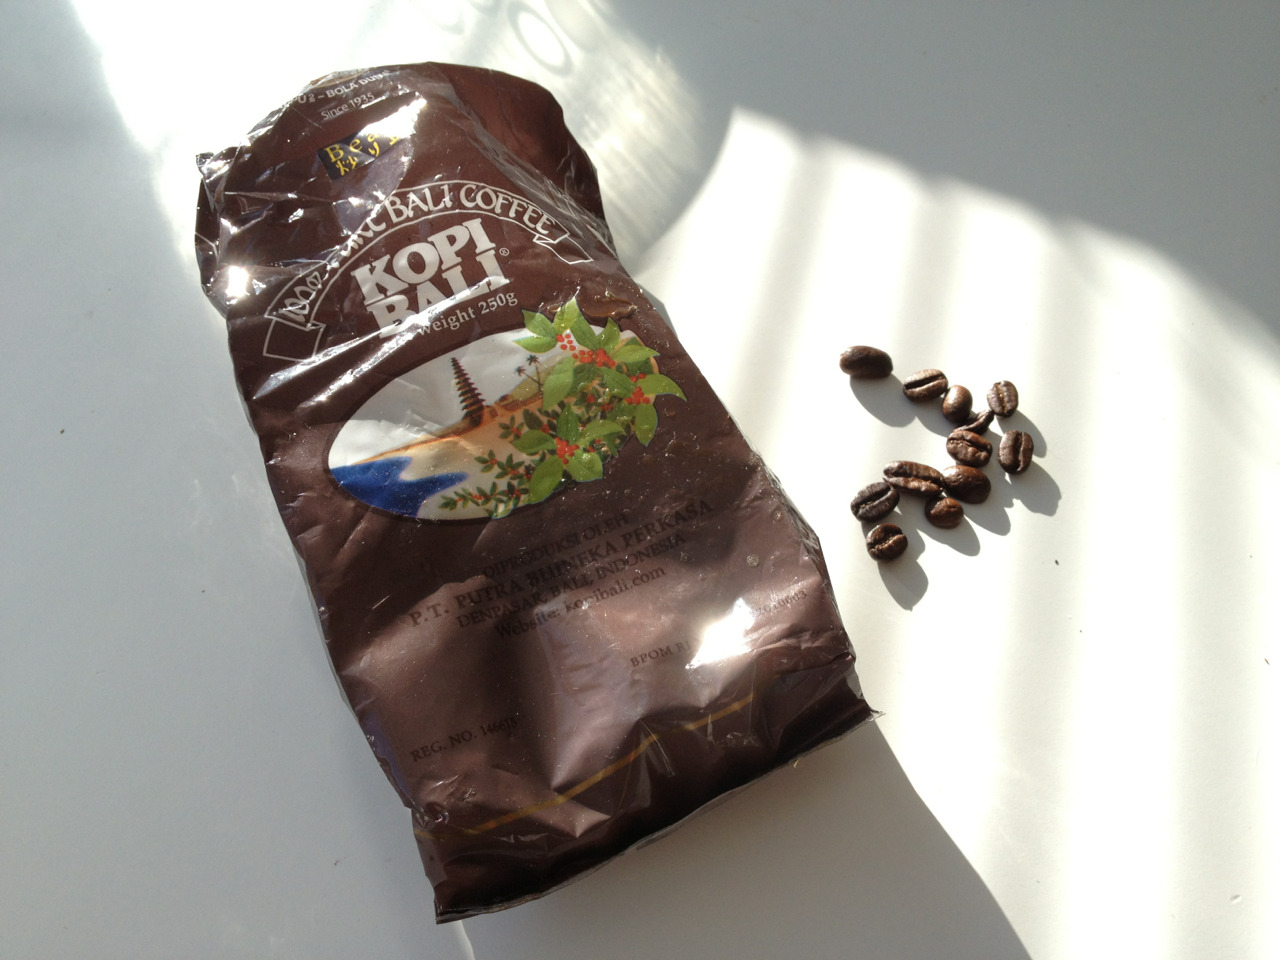 Coffee beans from Bali